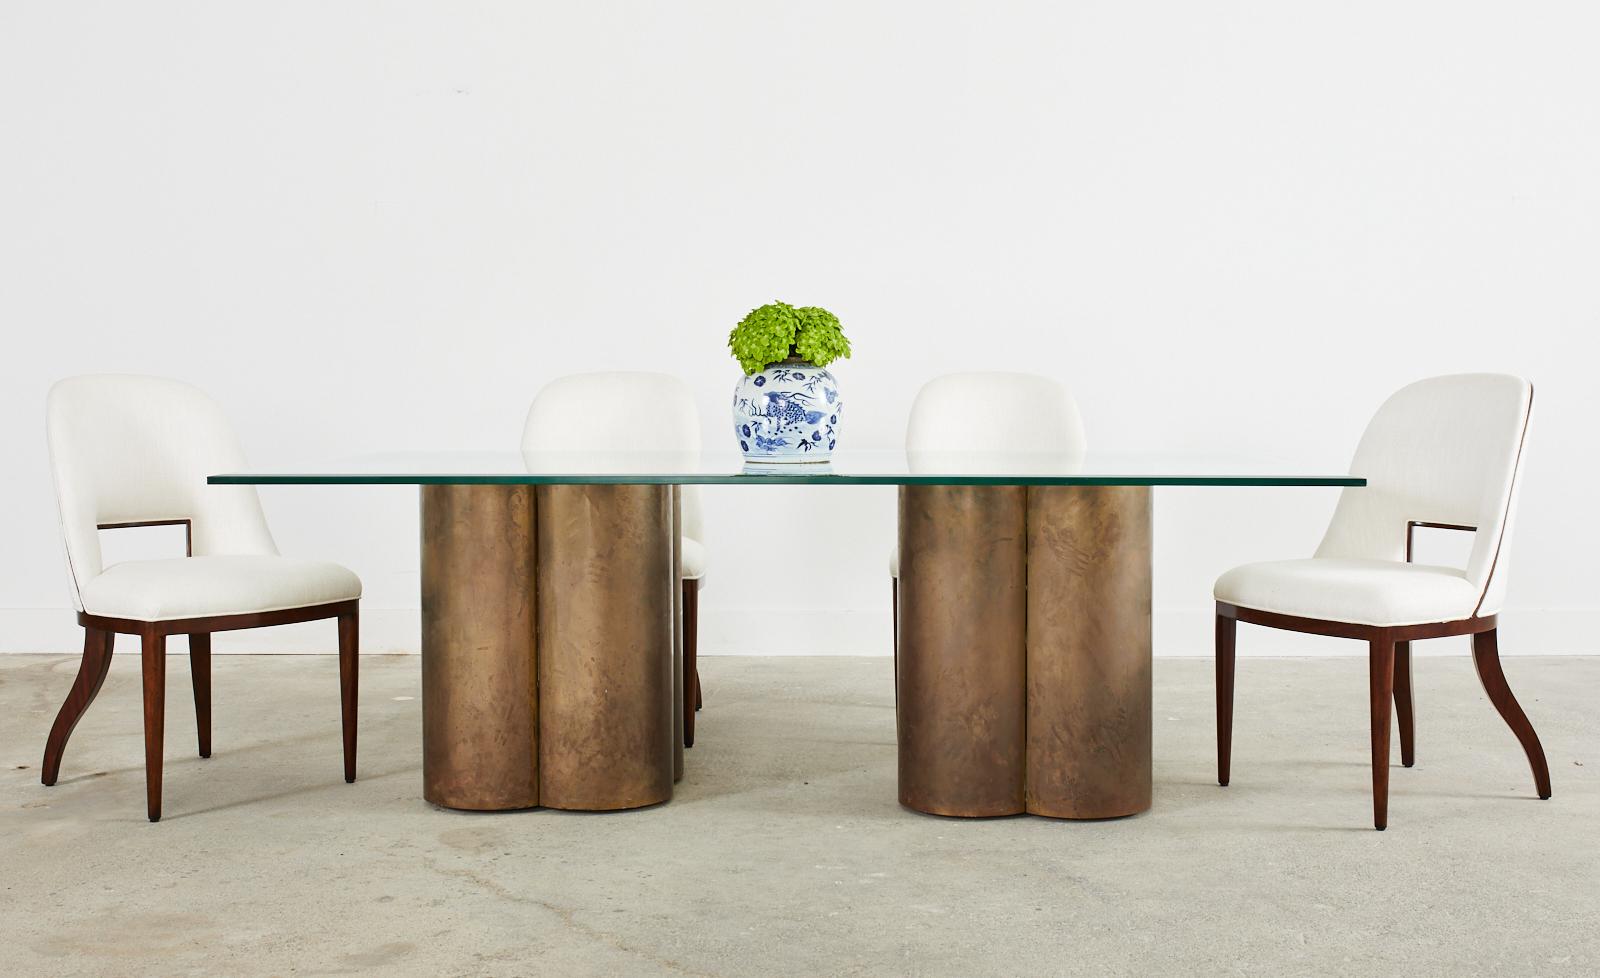 Fascinating mid-century modern dining table featuring two massive pedestals clad in patinated brass having quatrefoil or clover forms. The pedestals are unsigned however, they are crafted in the style and manner of Bernard Rohne for Mastercraft and